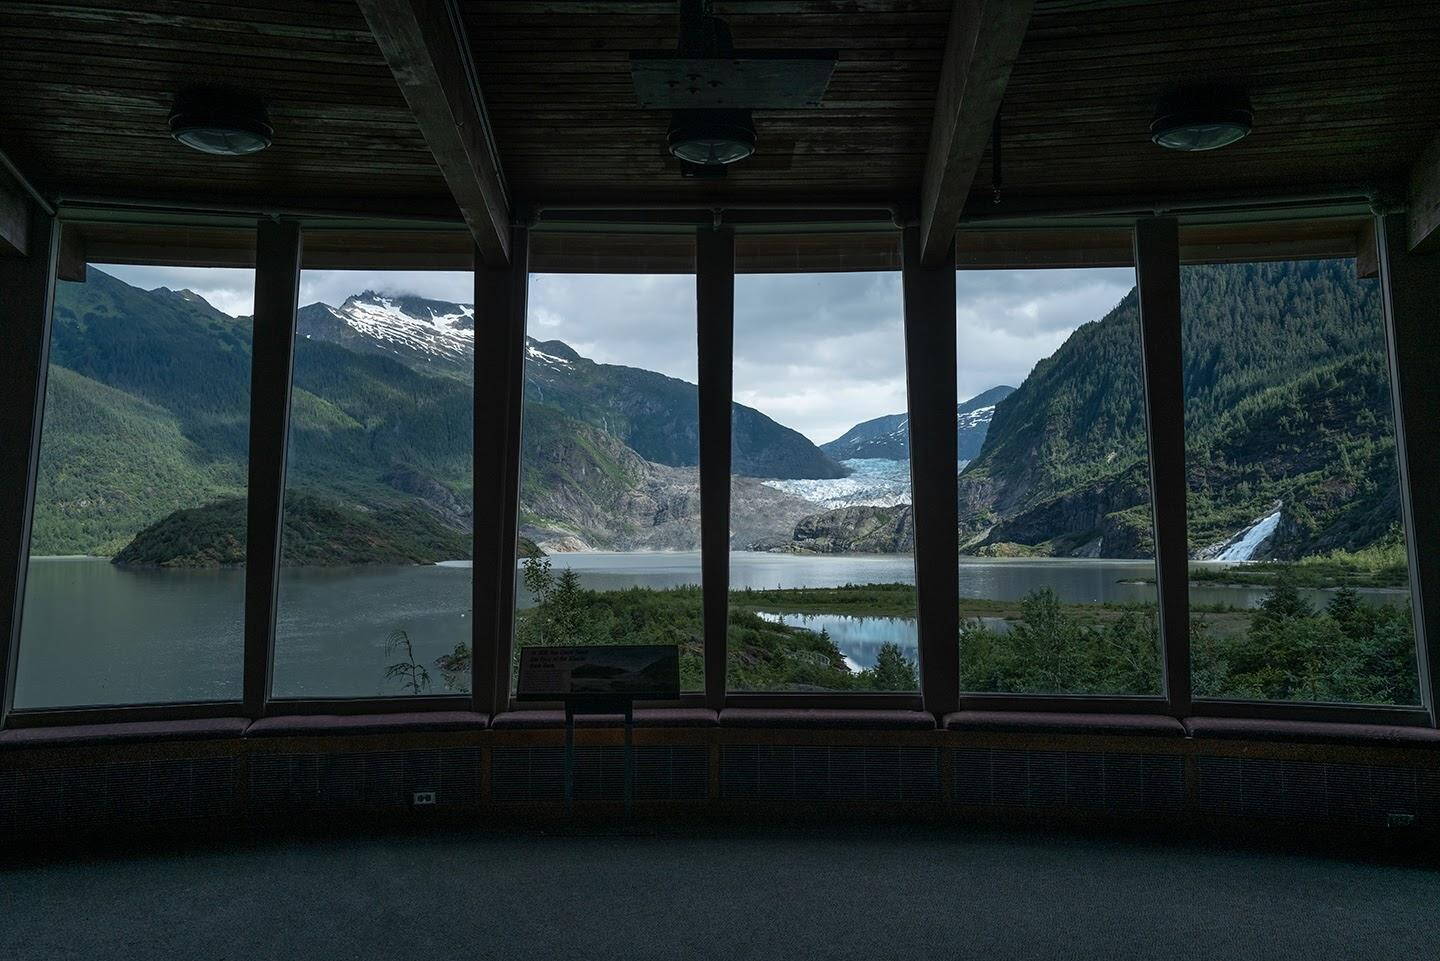 An artistic rendering of the Mendenhall Glacier Visitor Center in 2040 shows the glacier "will barely be visible" by 2050 based on a mid-range thinning rate scenario, according to a Juneau-specific climate change study published Monday. (Source: Amber Chapin, Michael Penn)